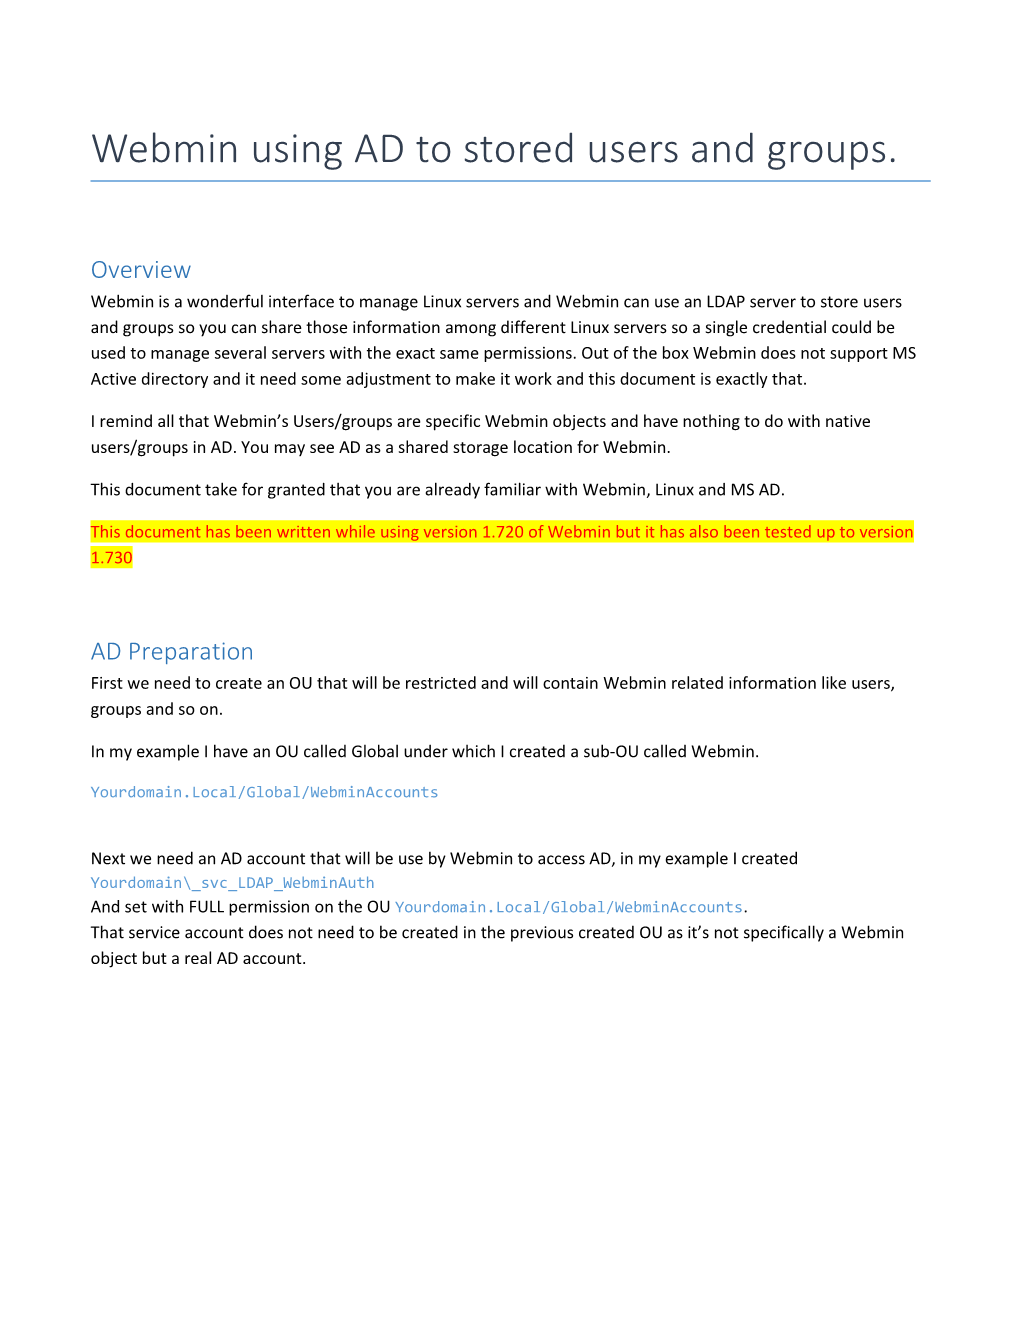 Webmin Using AD to Stored Users and Groups